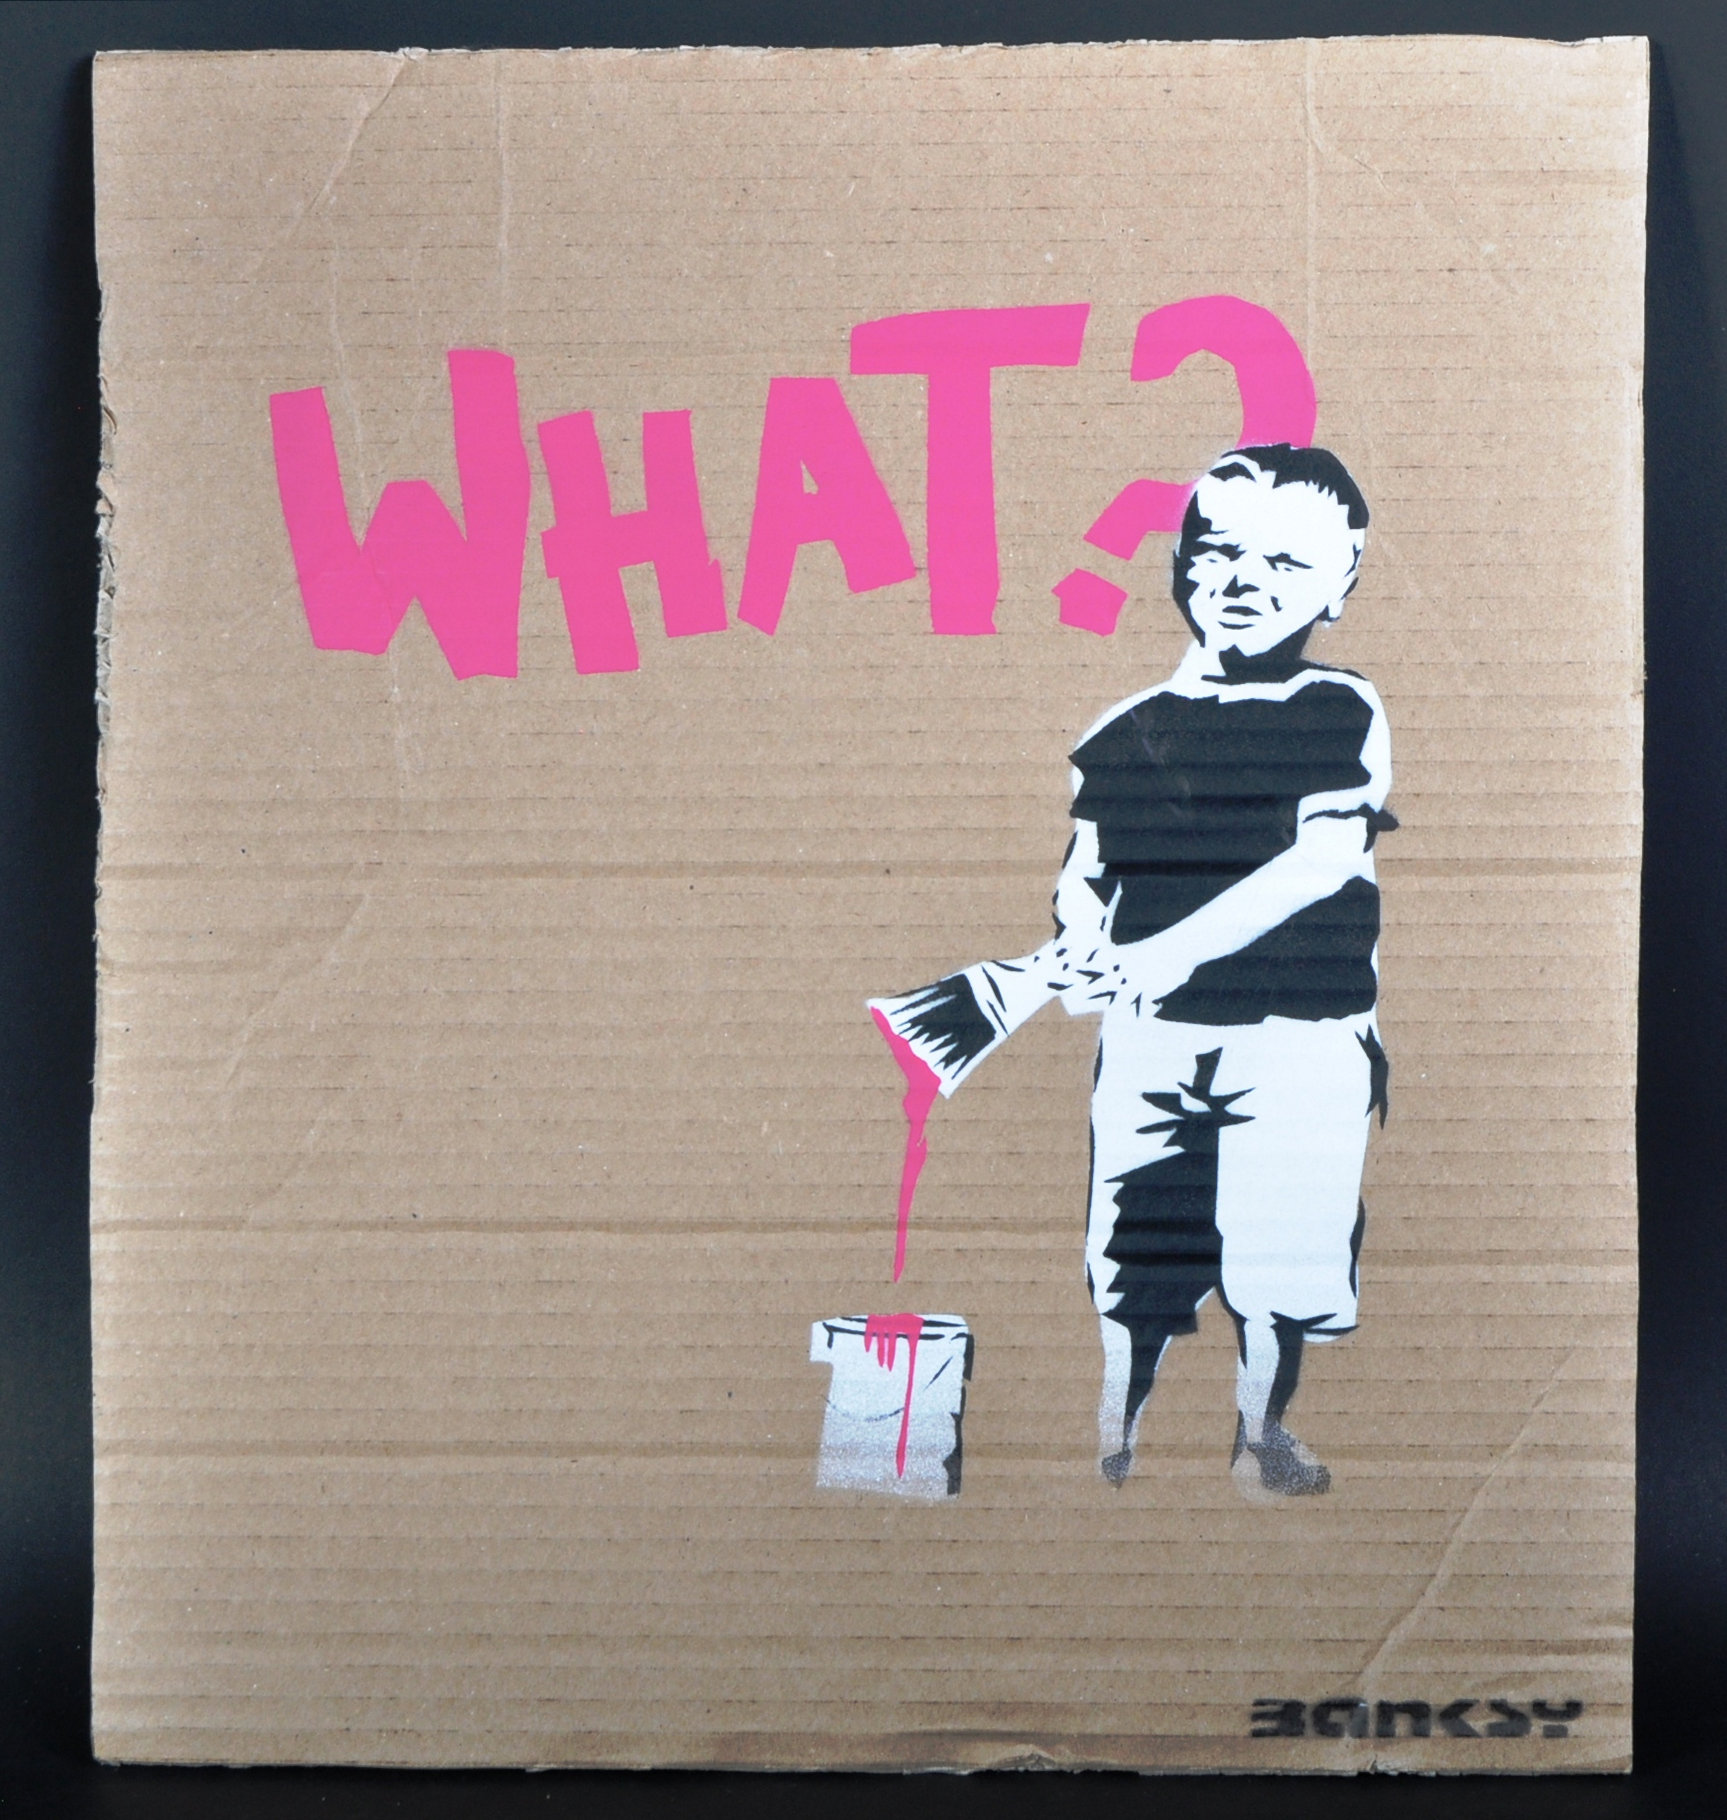 Banksy's Dismaland & Related Artists - Collection Of 'Free' Artwork & Memorabilia